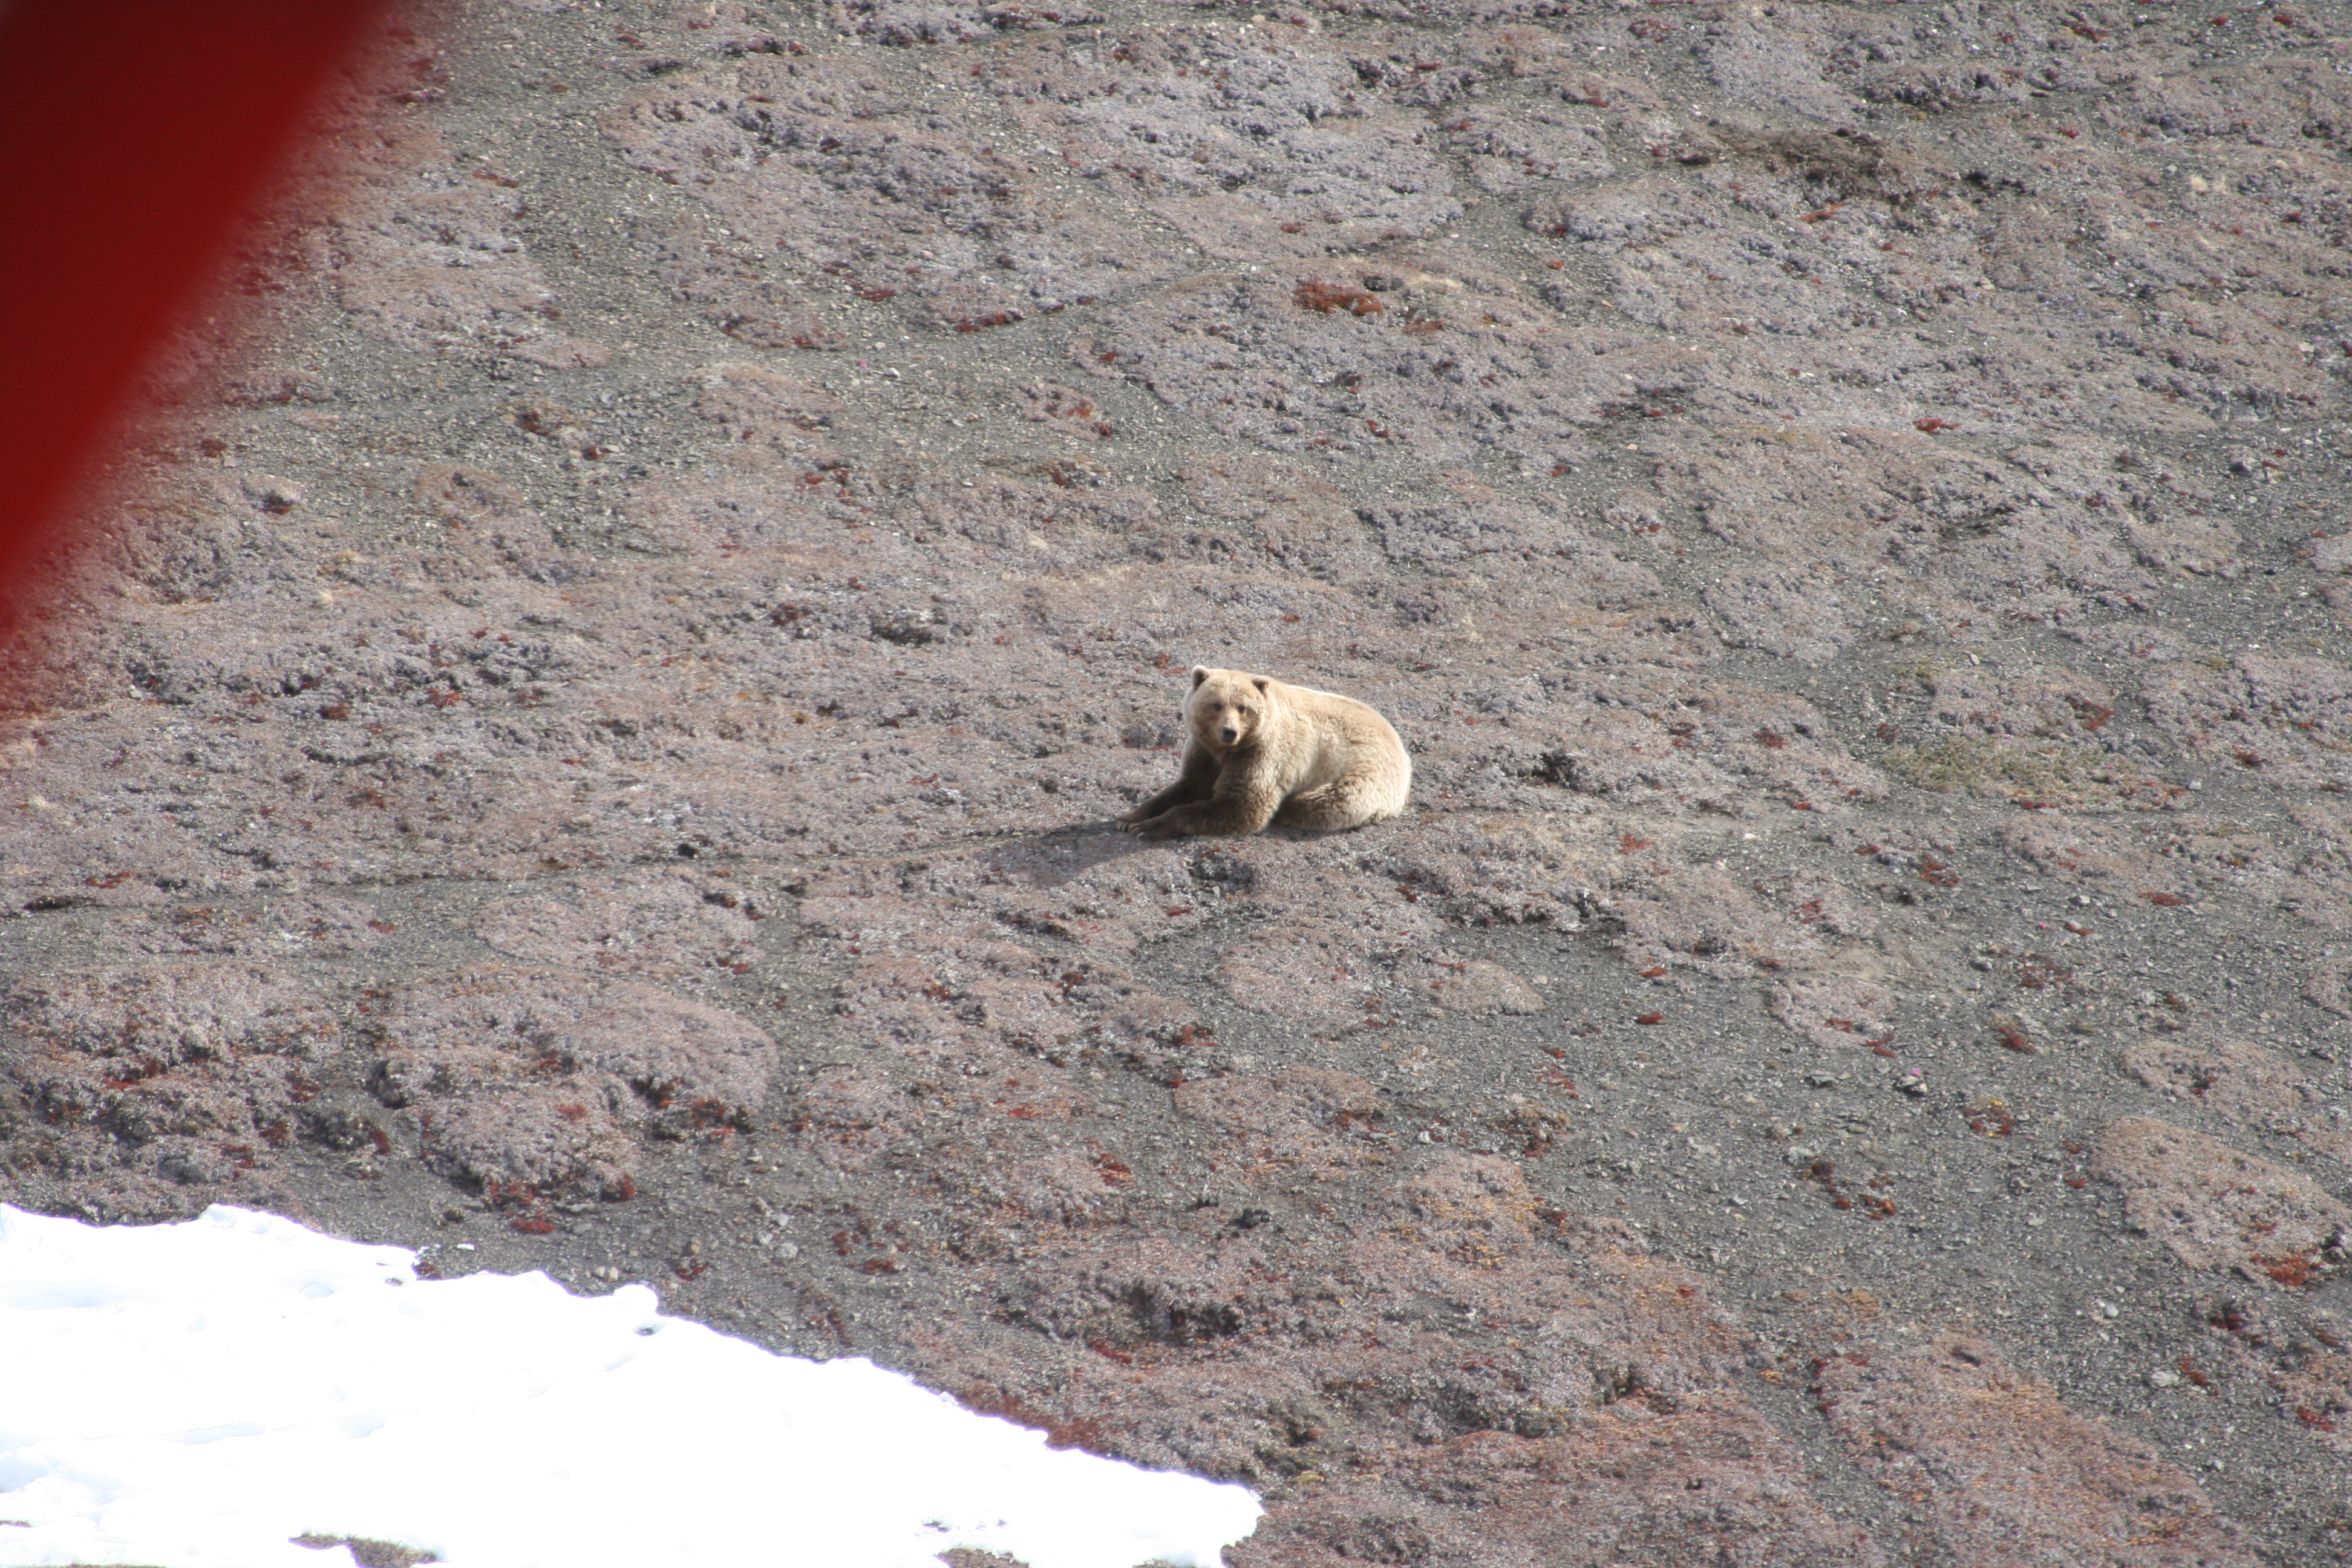 A sandy brown bear on the tundra looks up at the camera above.  